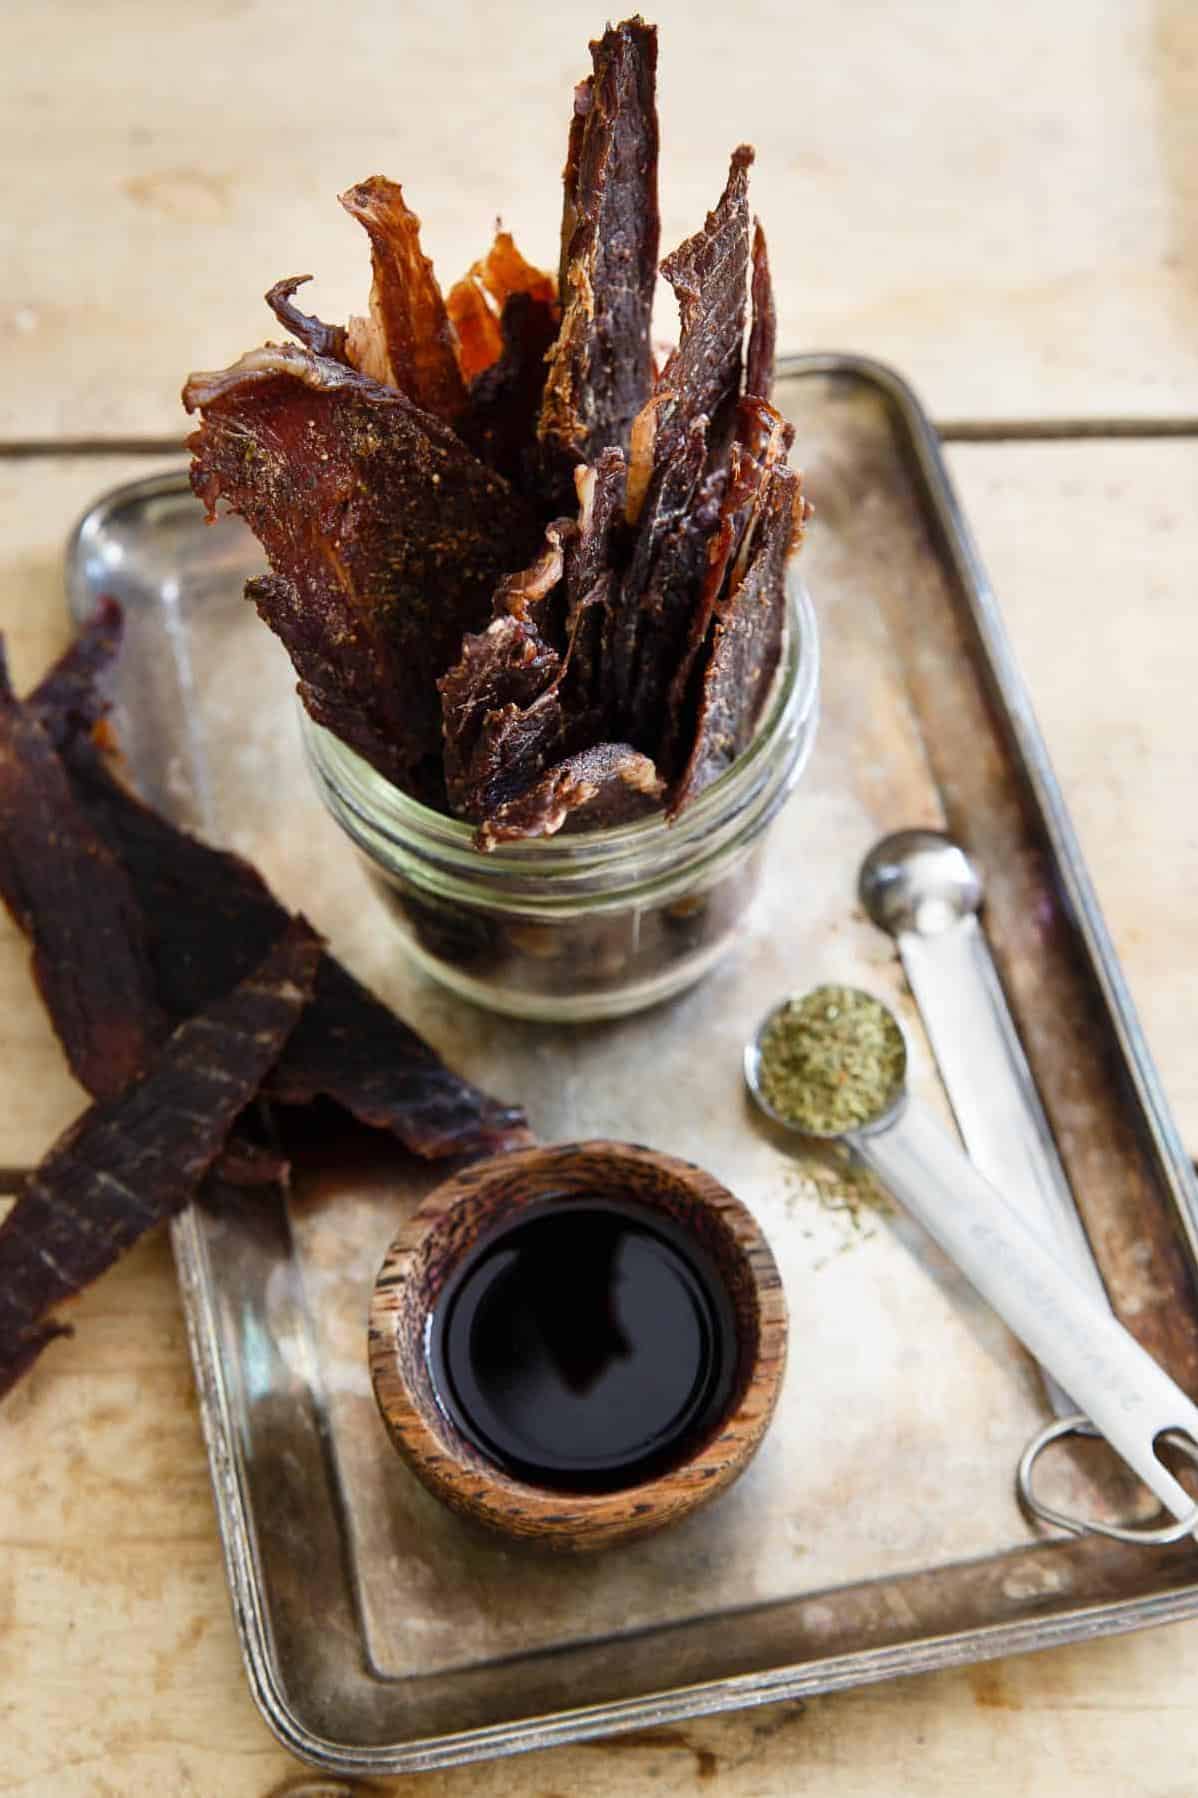  Treat your taste buds to a delicious and nutritious snack with lamb jerky.